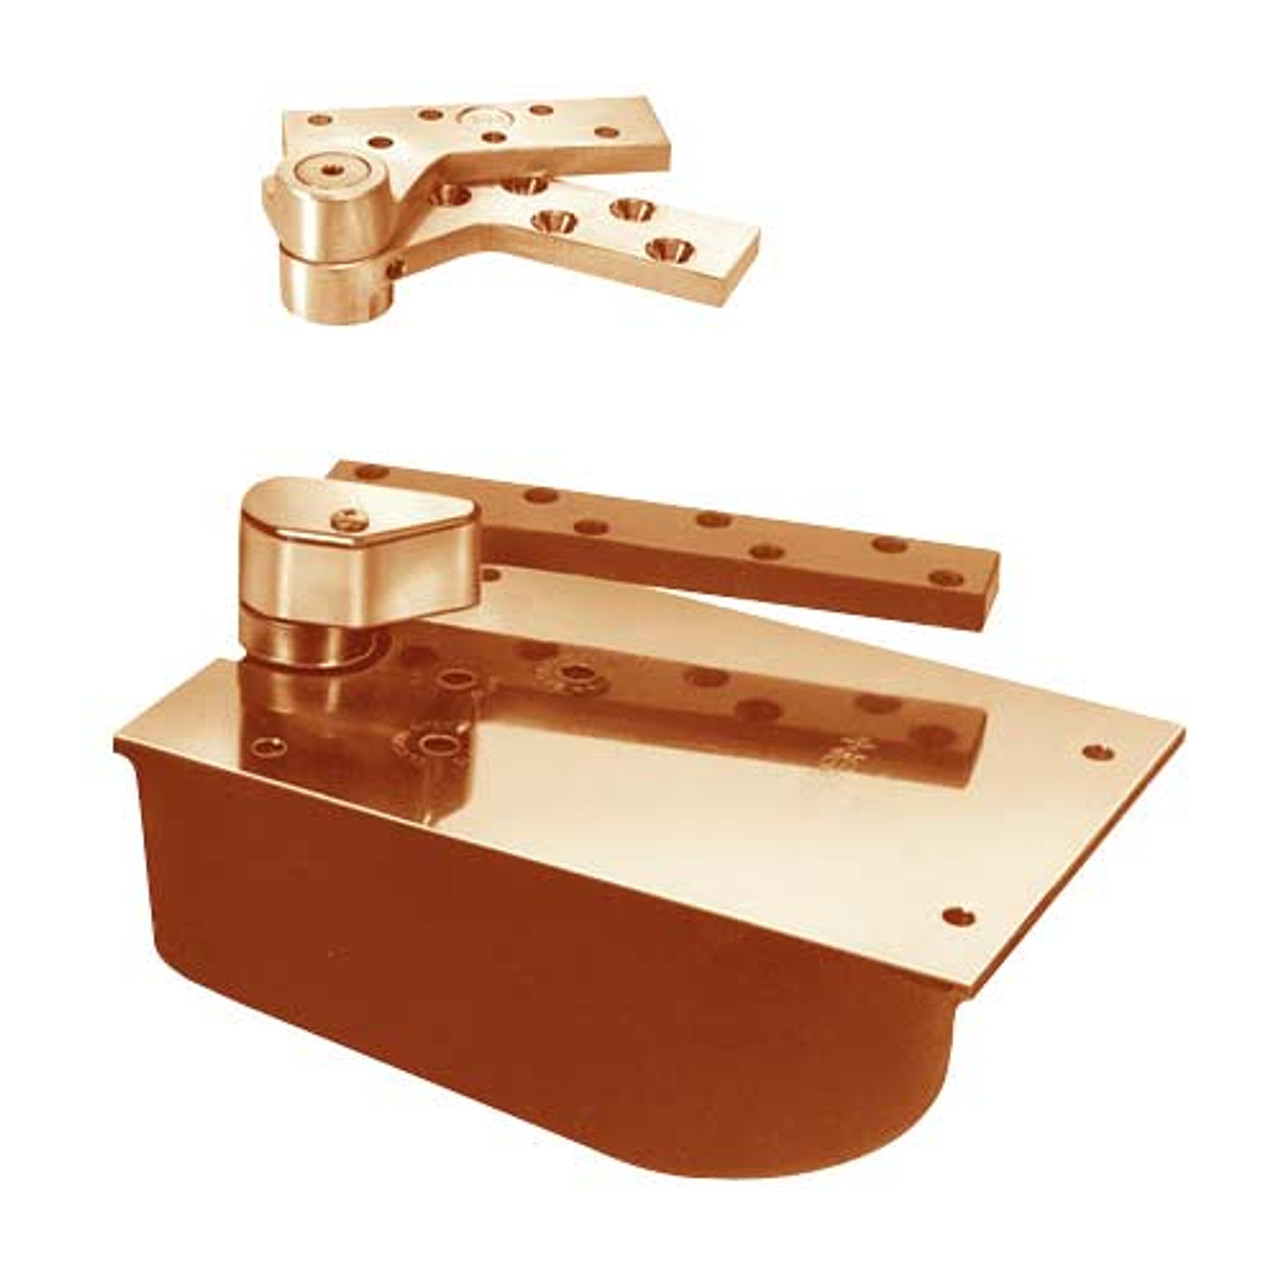 L27-85S-LTP-LH-2-1/2-612 Rixson 27 Series Extra Heavy Duty Lead Lined Offset Floor Closer in Satin Bronze Finish